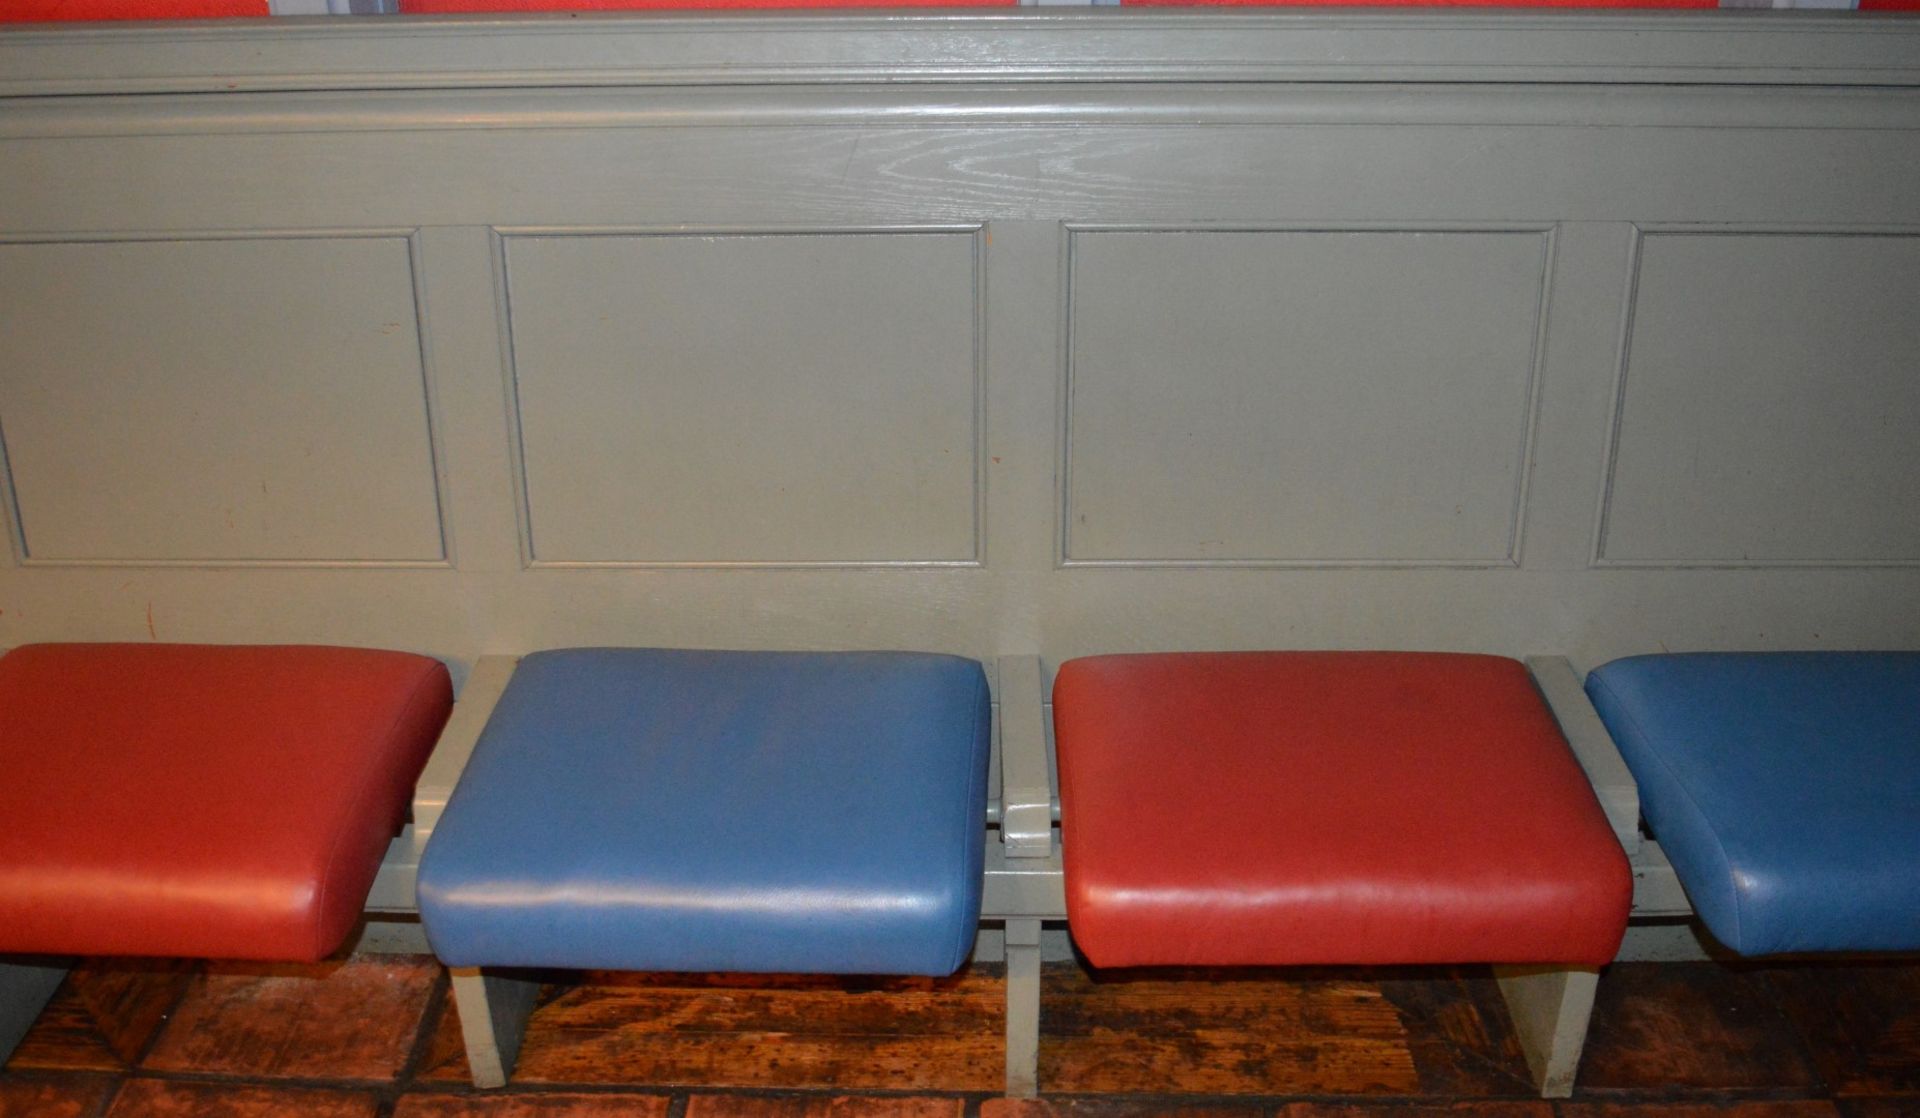 1 x Vintage Church High Back Pew With Folding Seats - Church Reclamation - Refinished in Green - Image 4 of 10